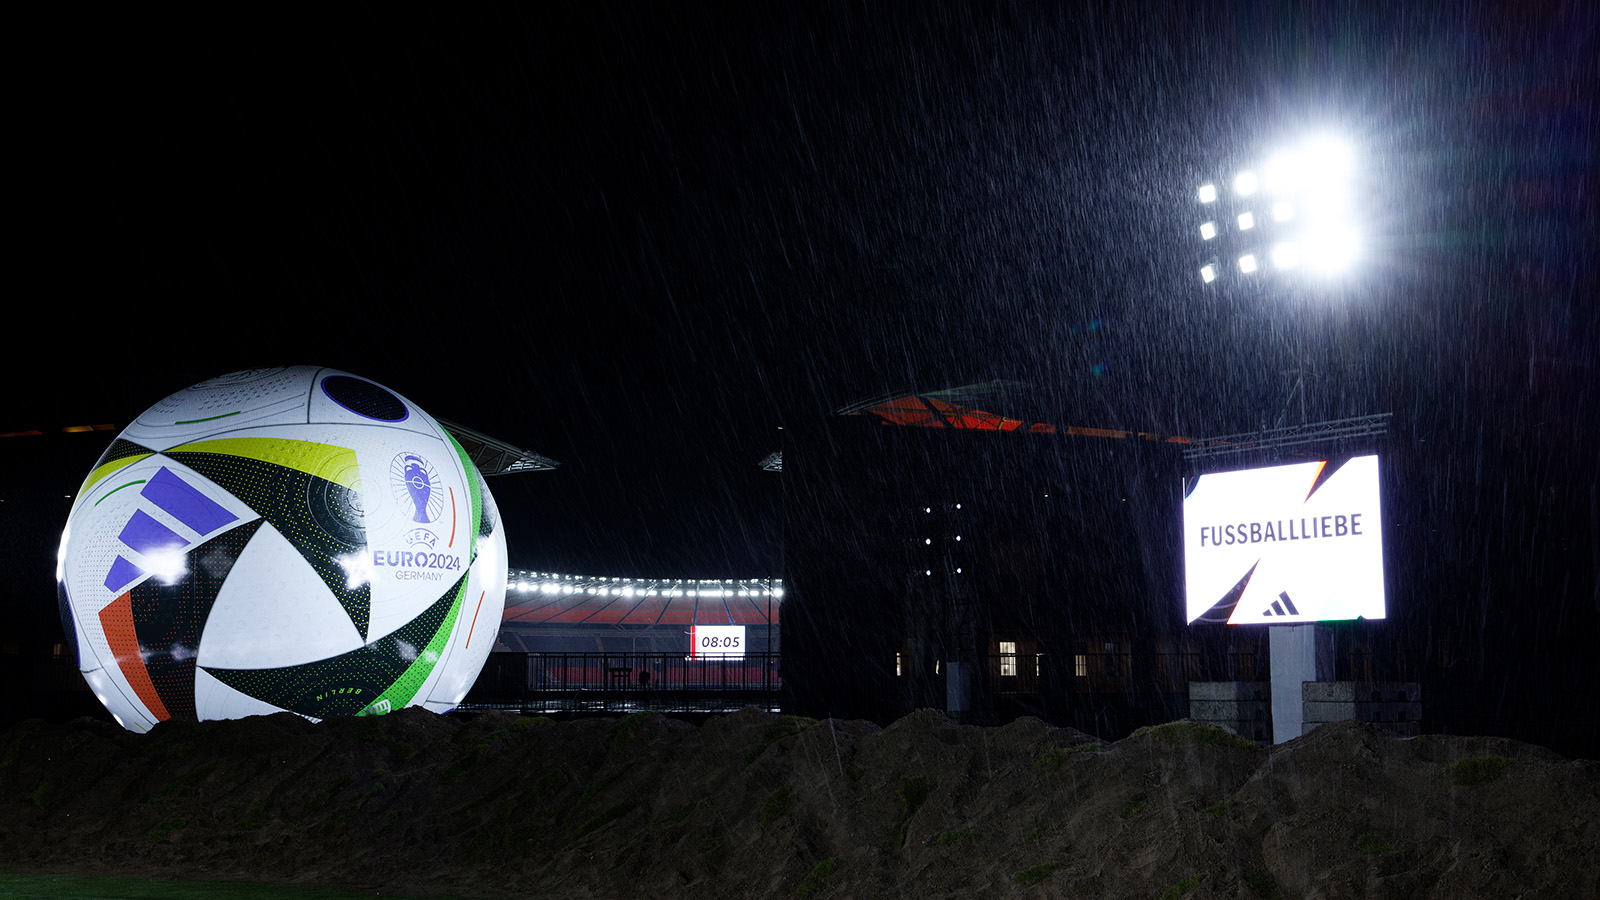 Variable, weatherproof lighting for sporting events: GLP ArenaLED1 Touring highlights the love of football